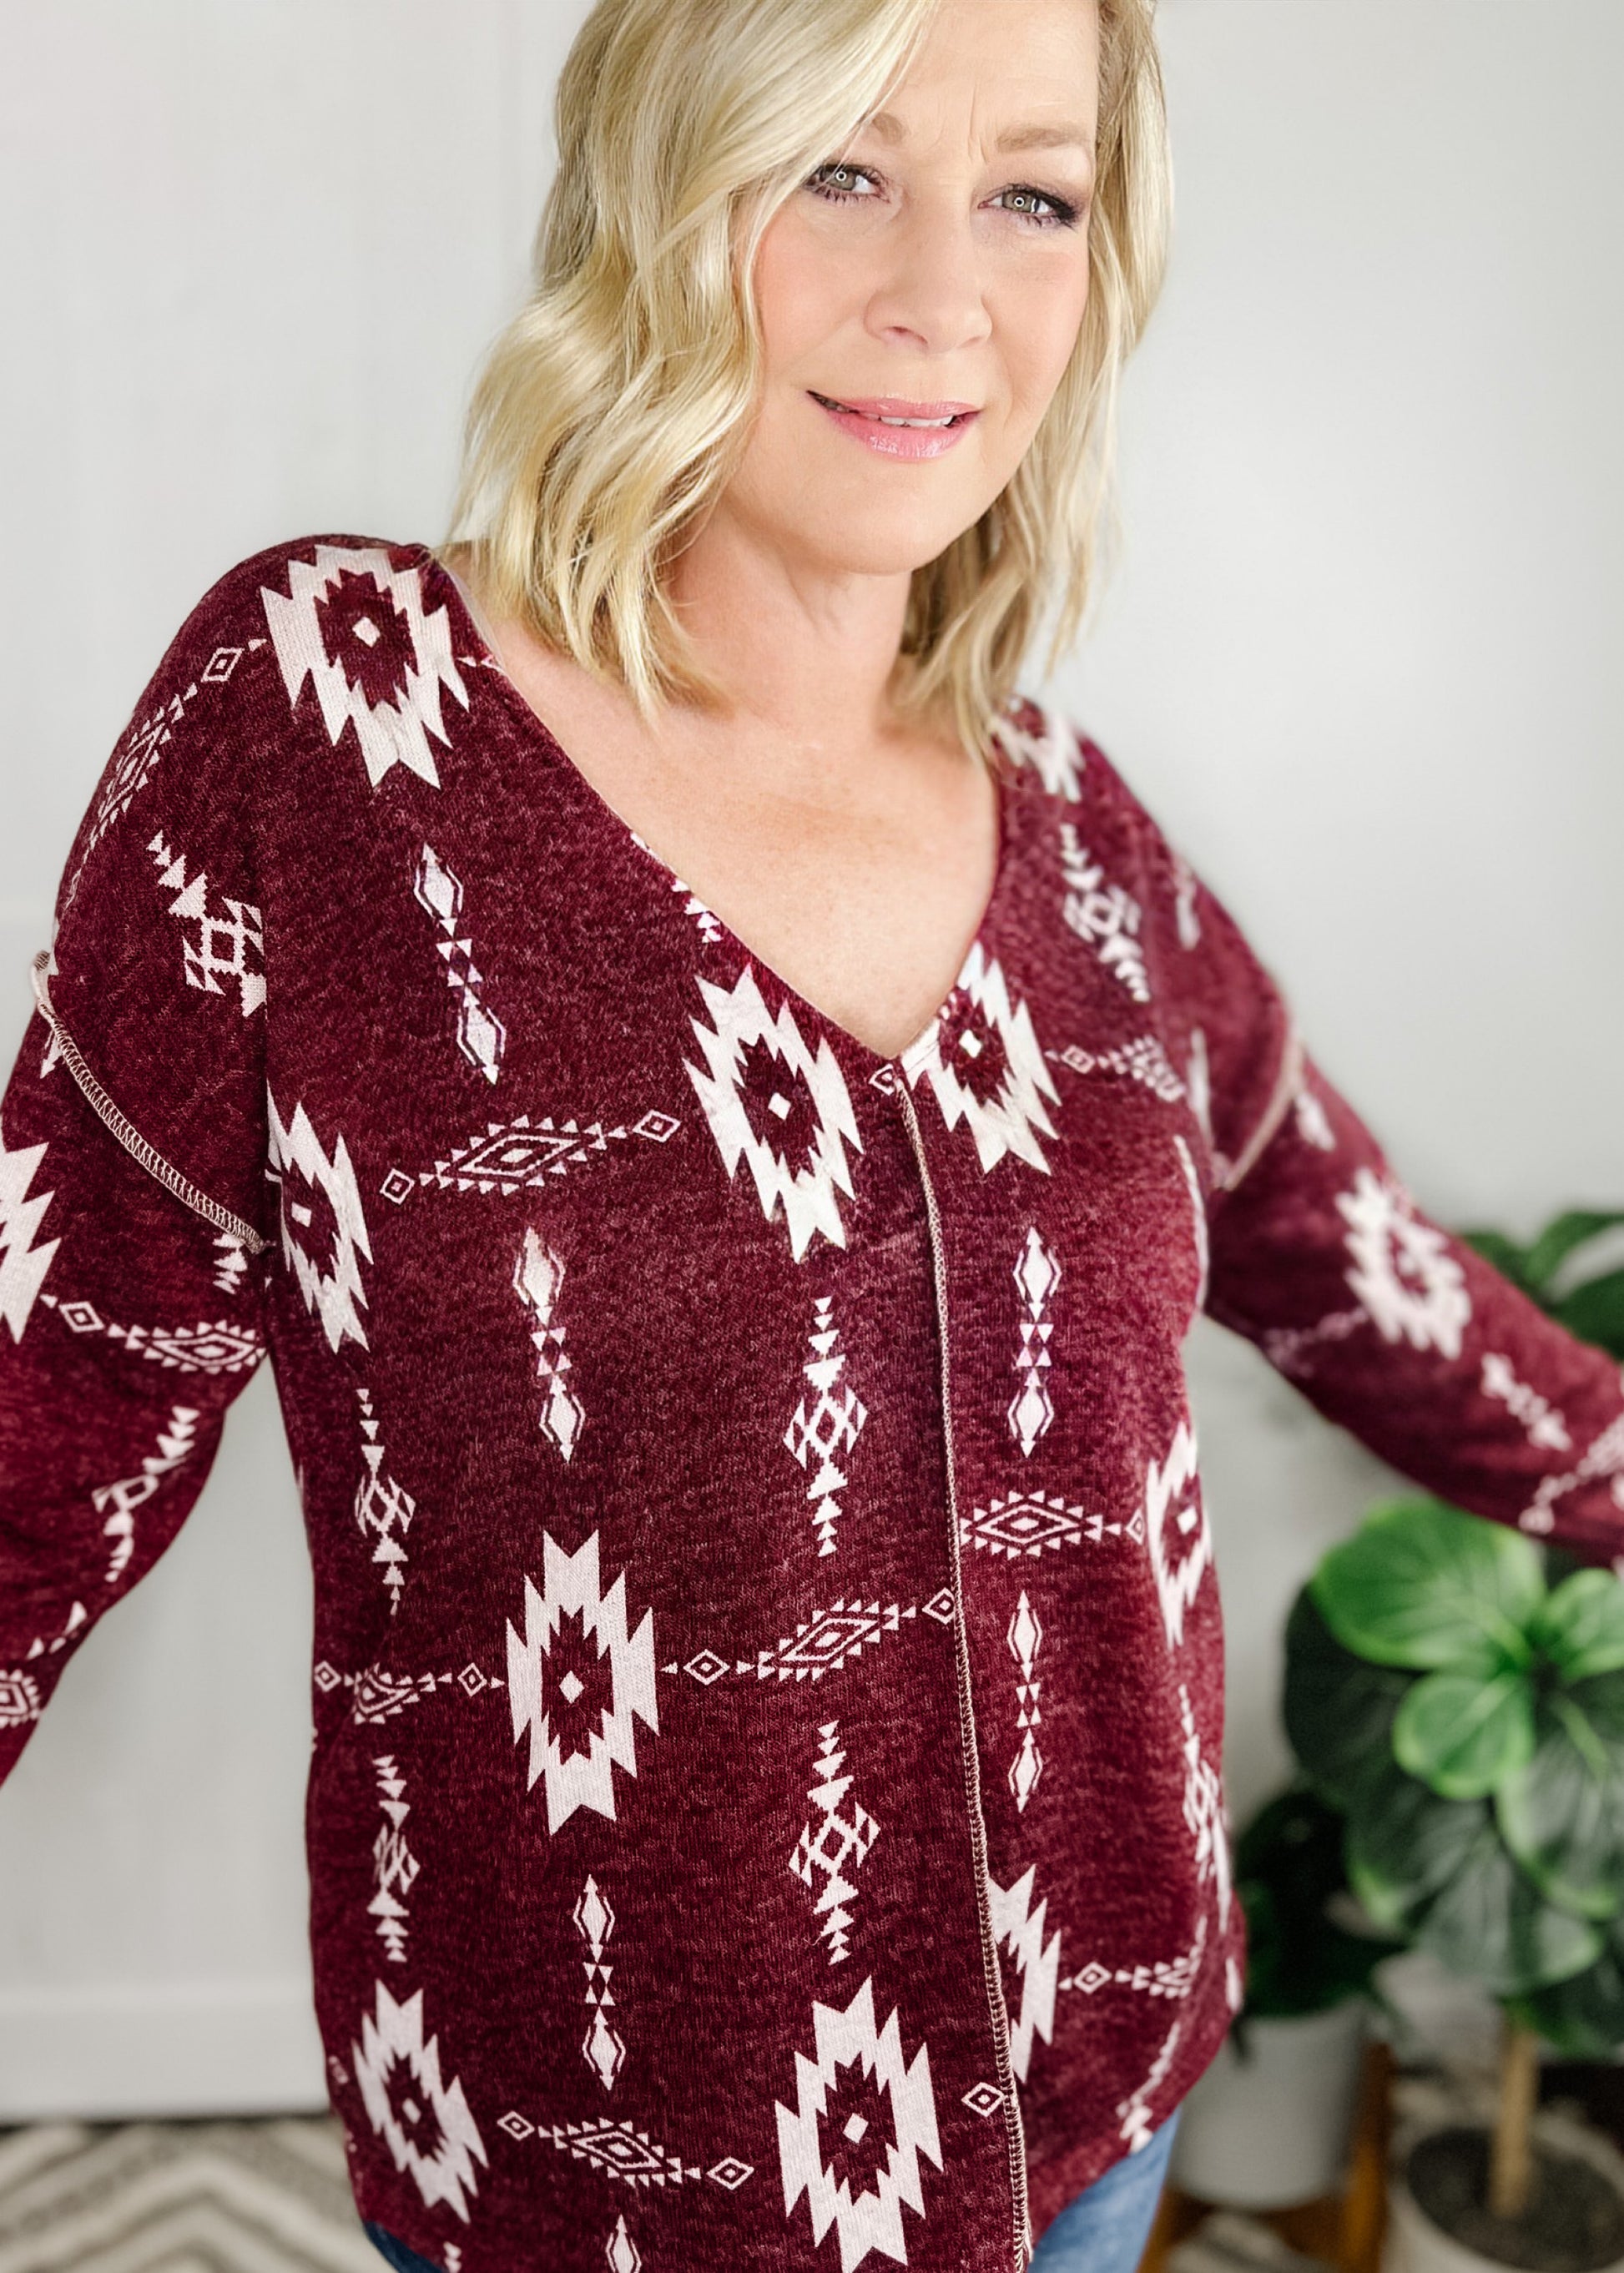 Aztec print top in Burgundy. Top features, deep v neckline, long sleeves, straight hemline, stitch detail going down front and at shoulder.  Shown with out high rise skinny jeans. 